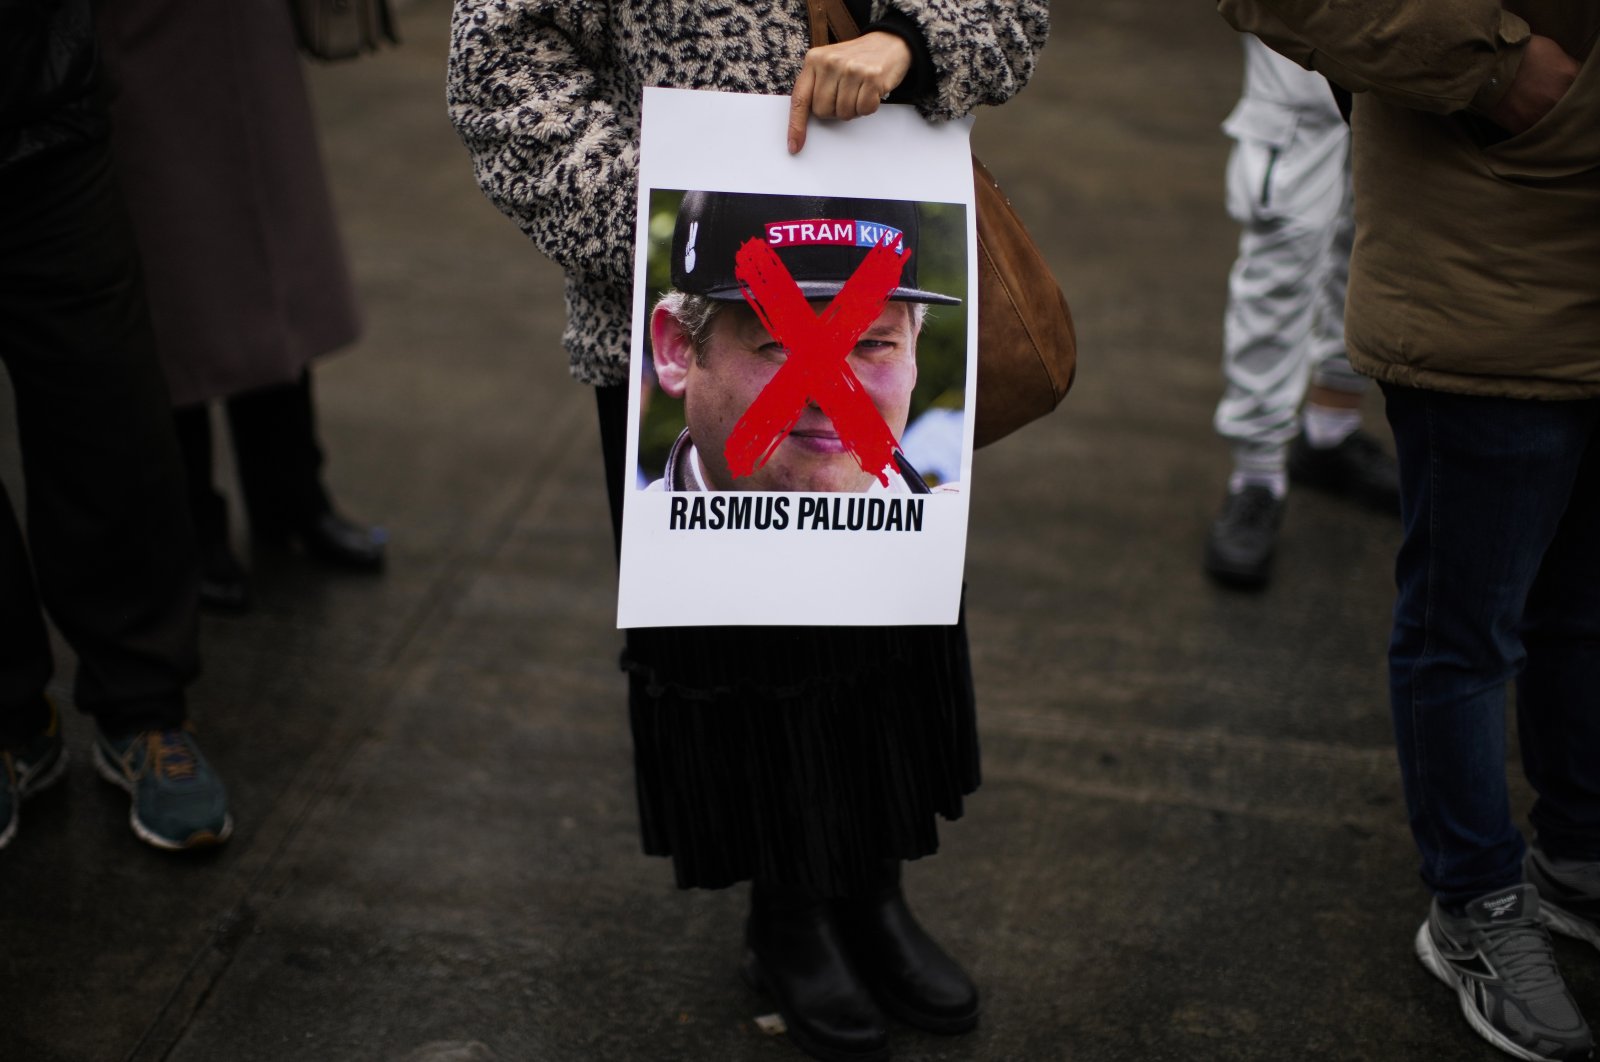 A woman holds a photograph of far-right activist Rasmus Paludan during a small protest outside the Swedish Consulate in Istanbul, Türkiye, Jan. 28, 2023. (AP File Photo)